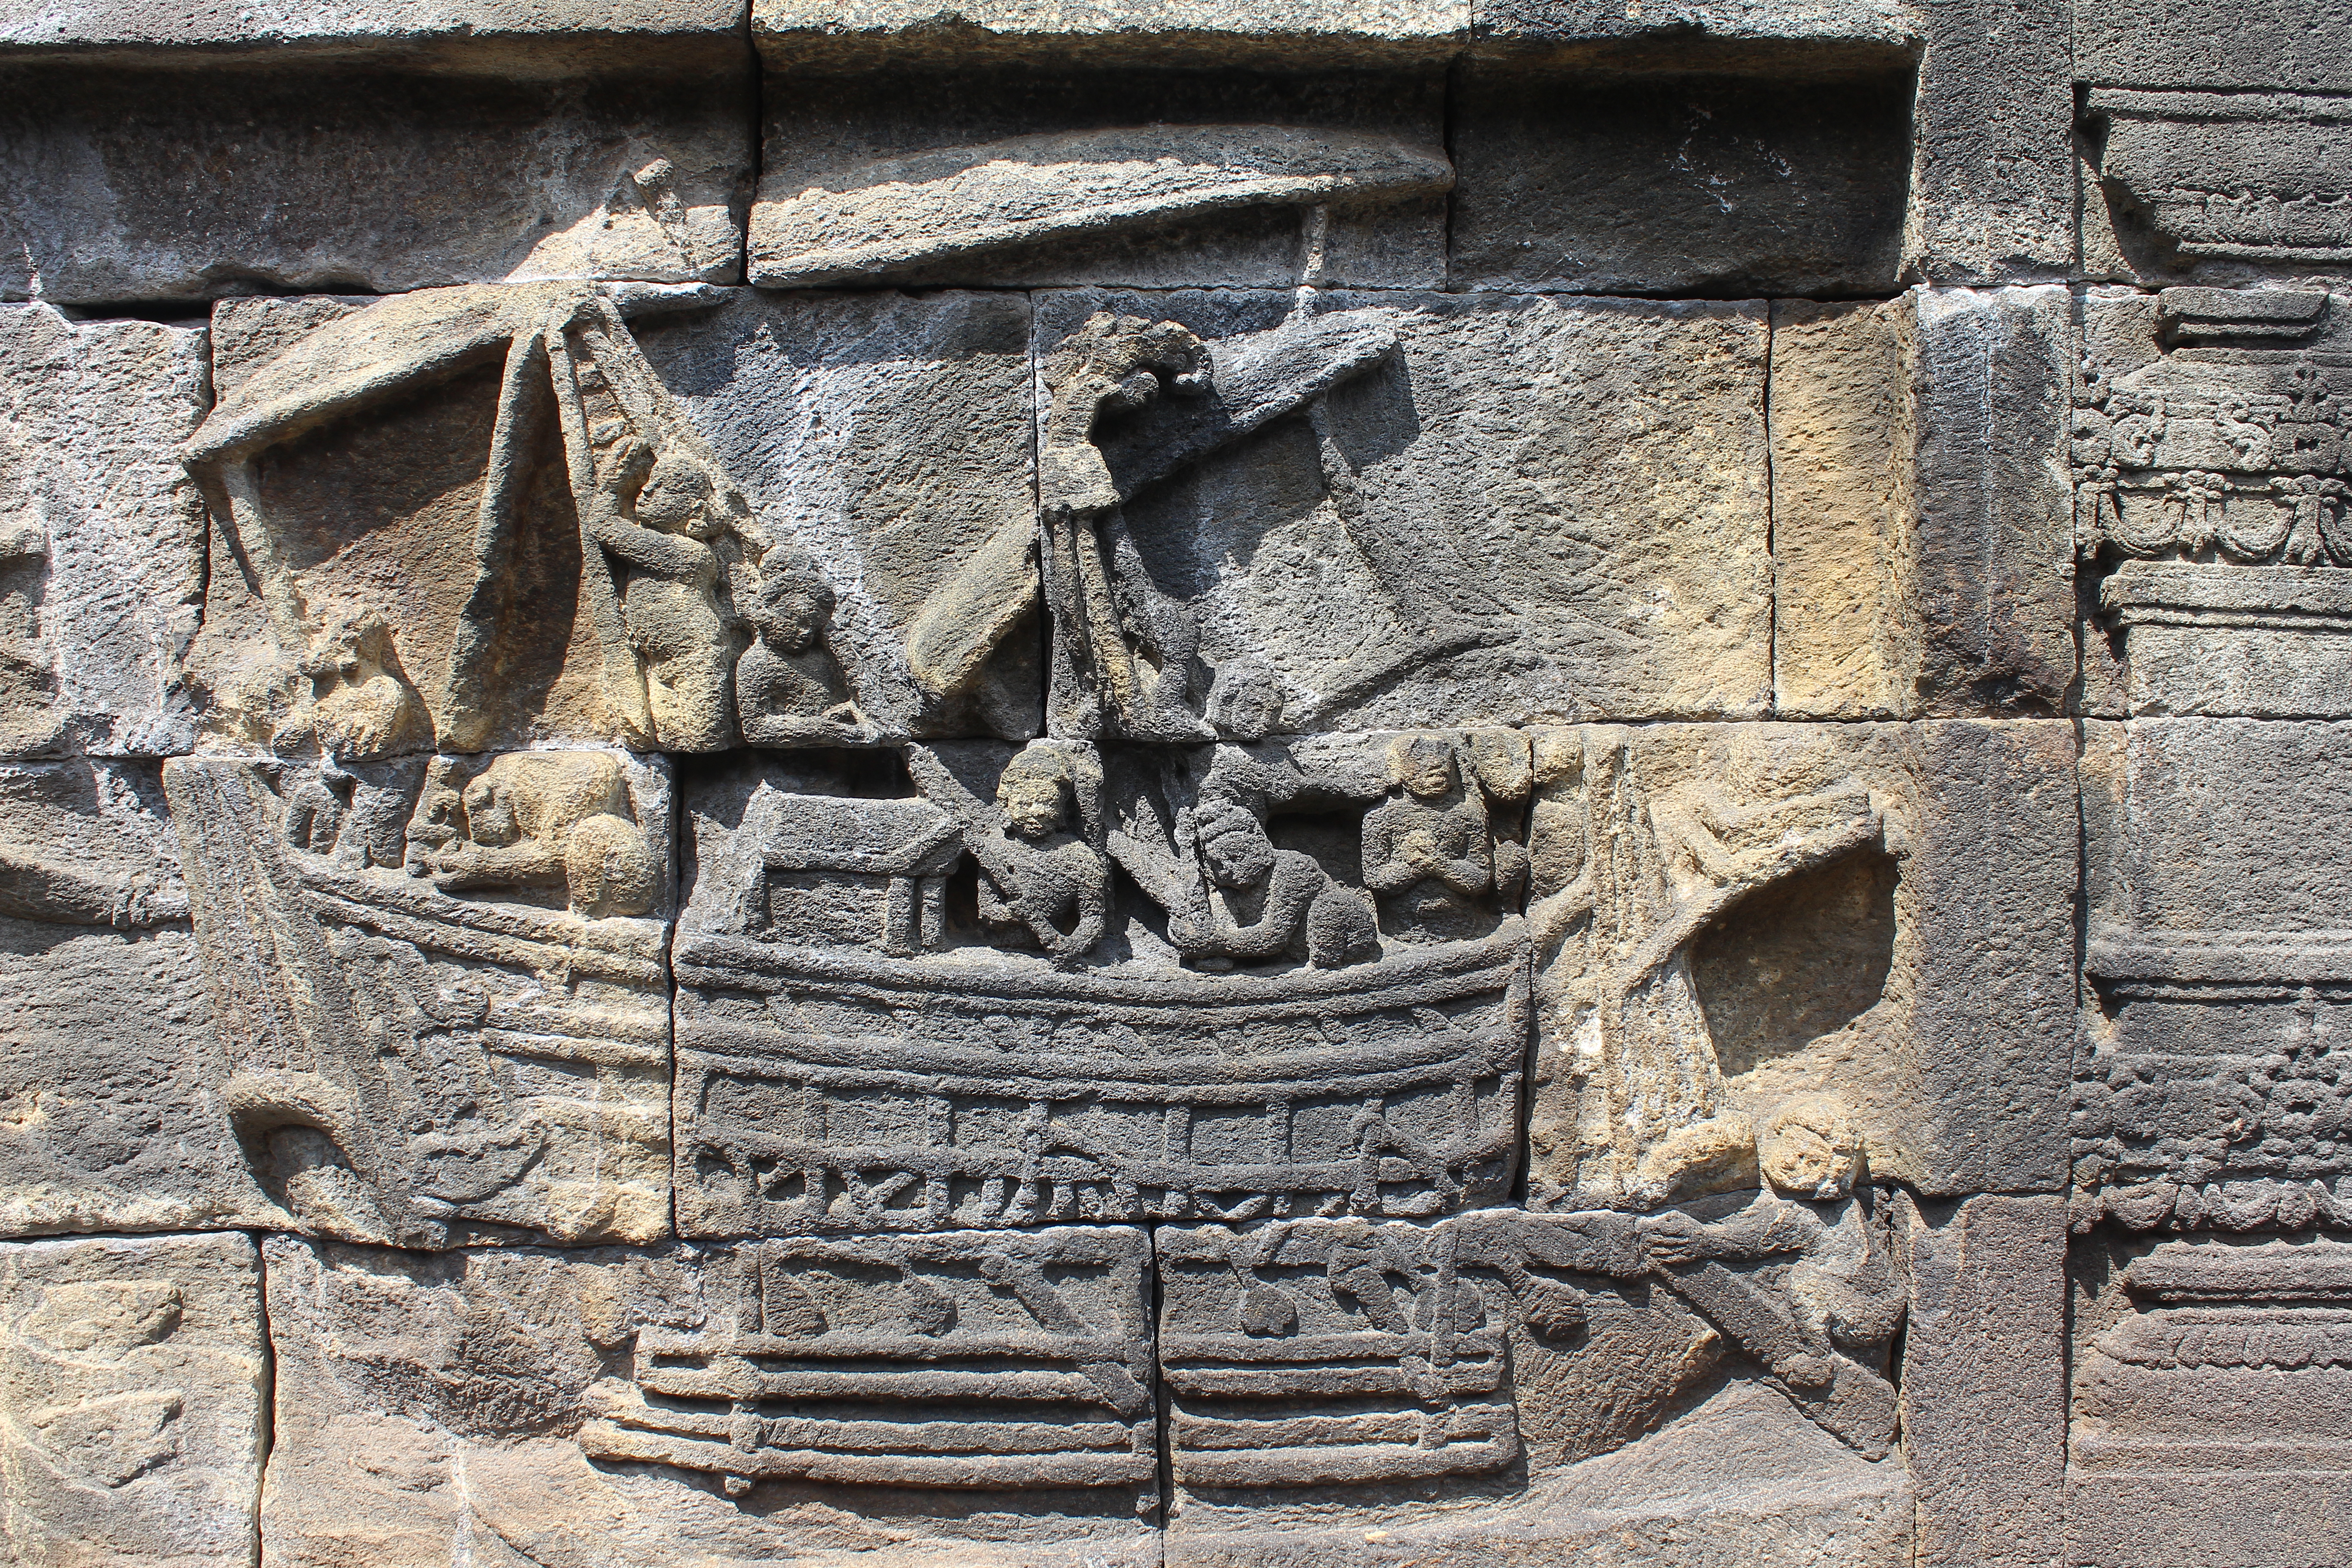 Relief carving depicting a boat with figures in it